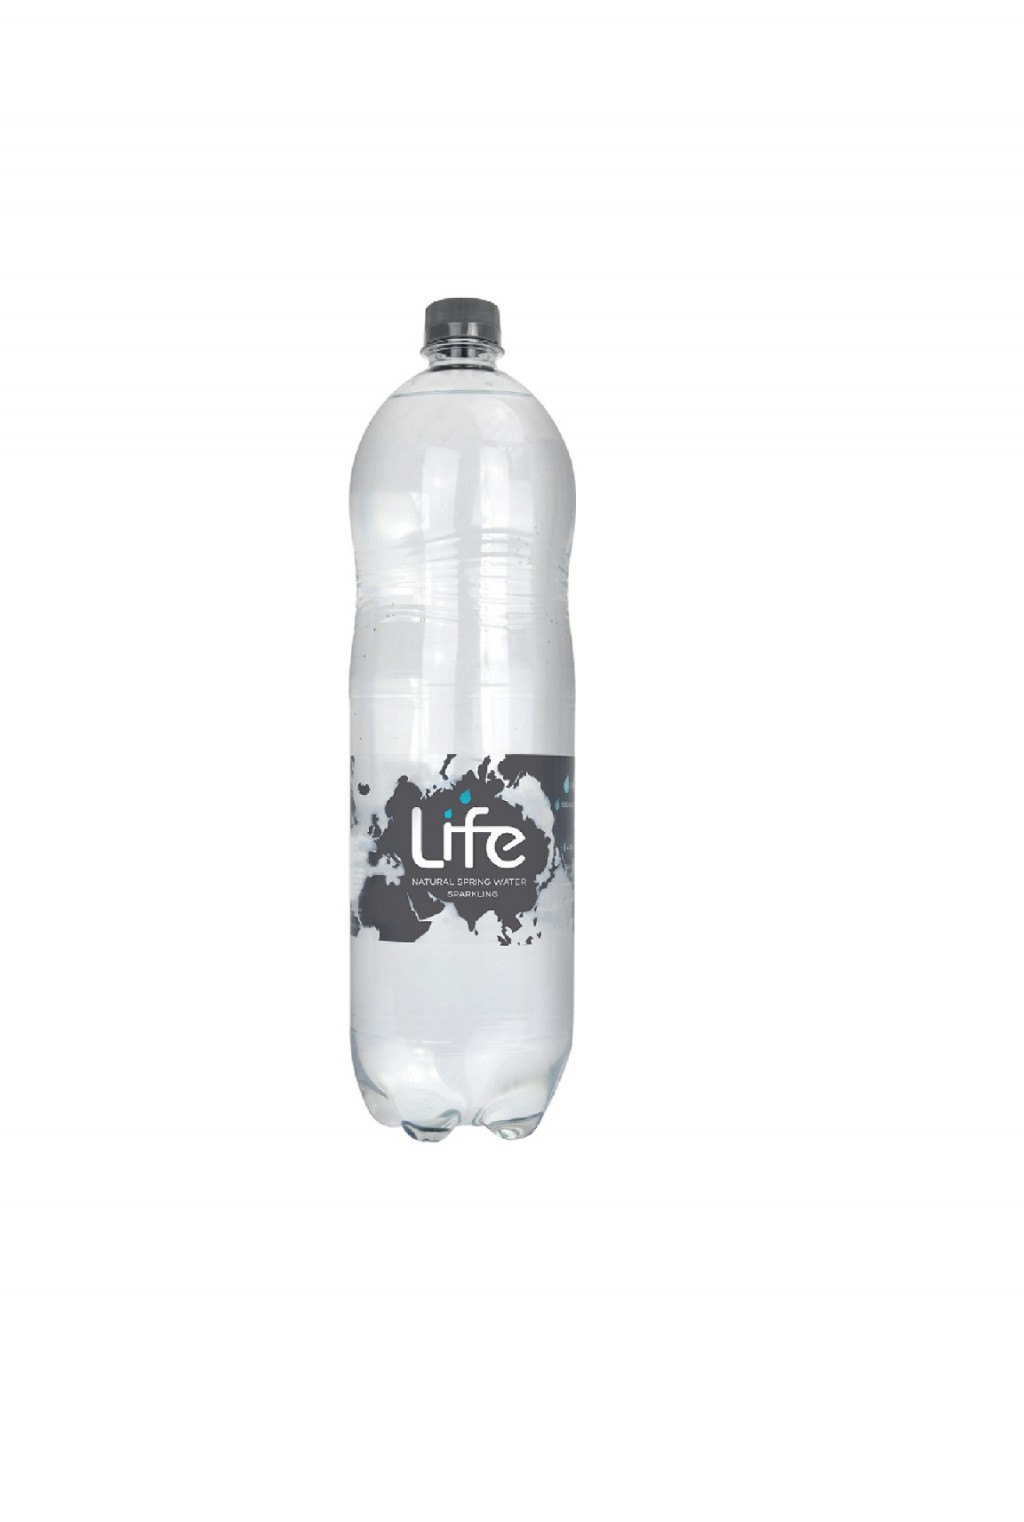 LIFE Sparkling Water (1.5ltr)